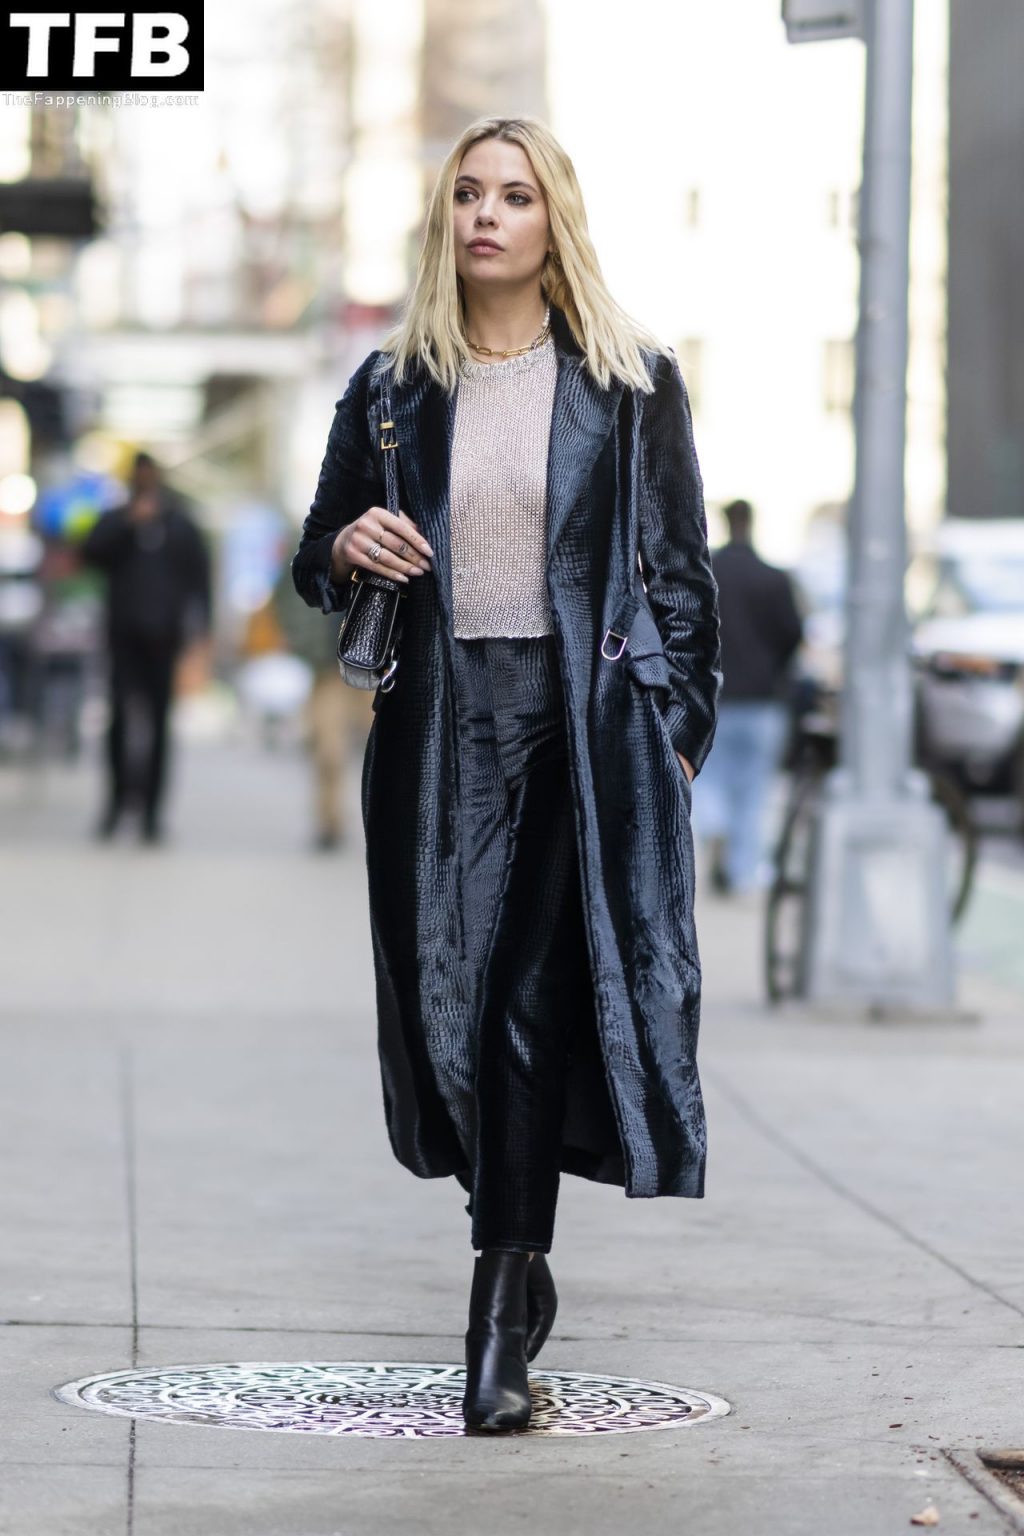 Ashley Benson Sexy The Fappening Blog 5 1 1024x1536 - Braless Ashley Benson Looks Stylish While Heading to a Meeting in NYC (20 Photos)